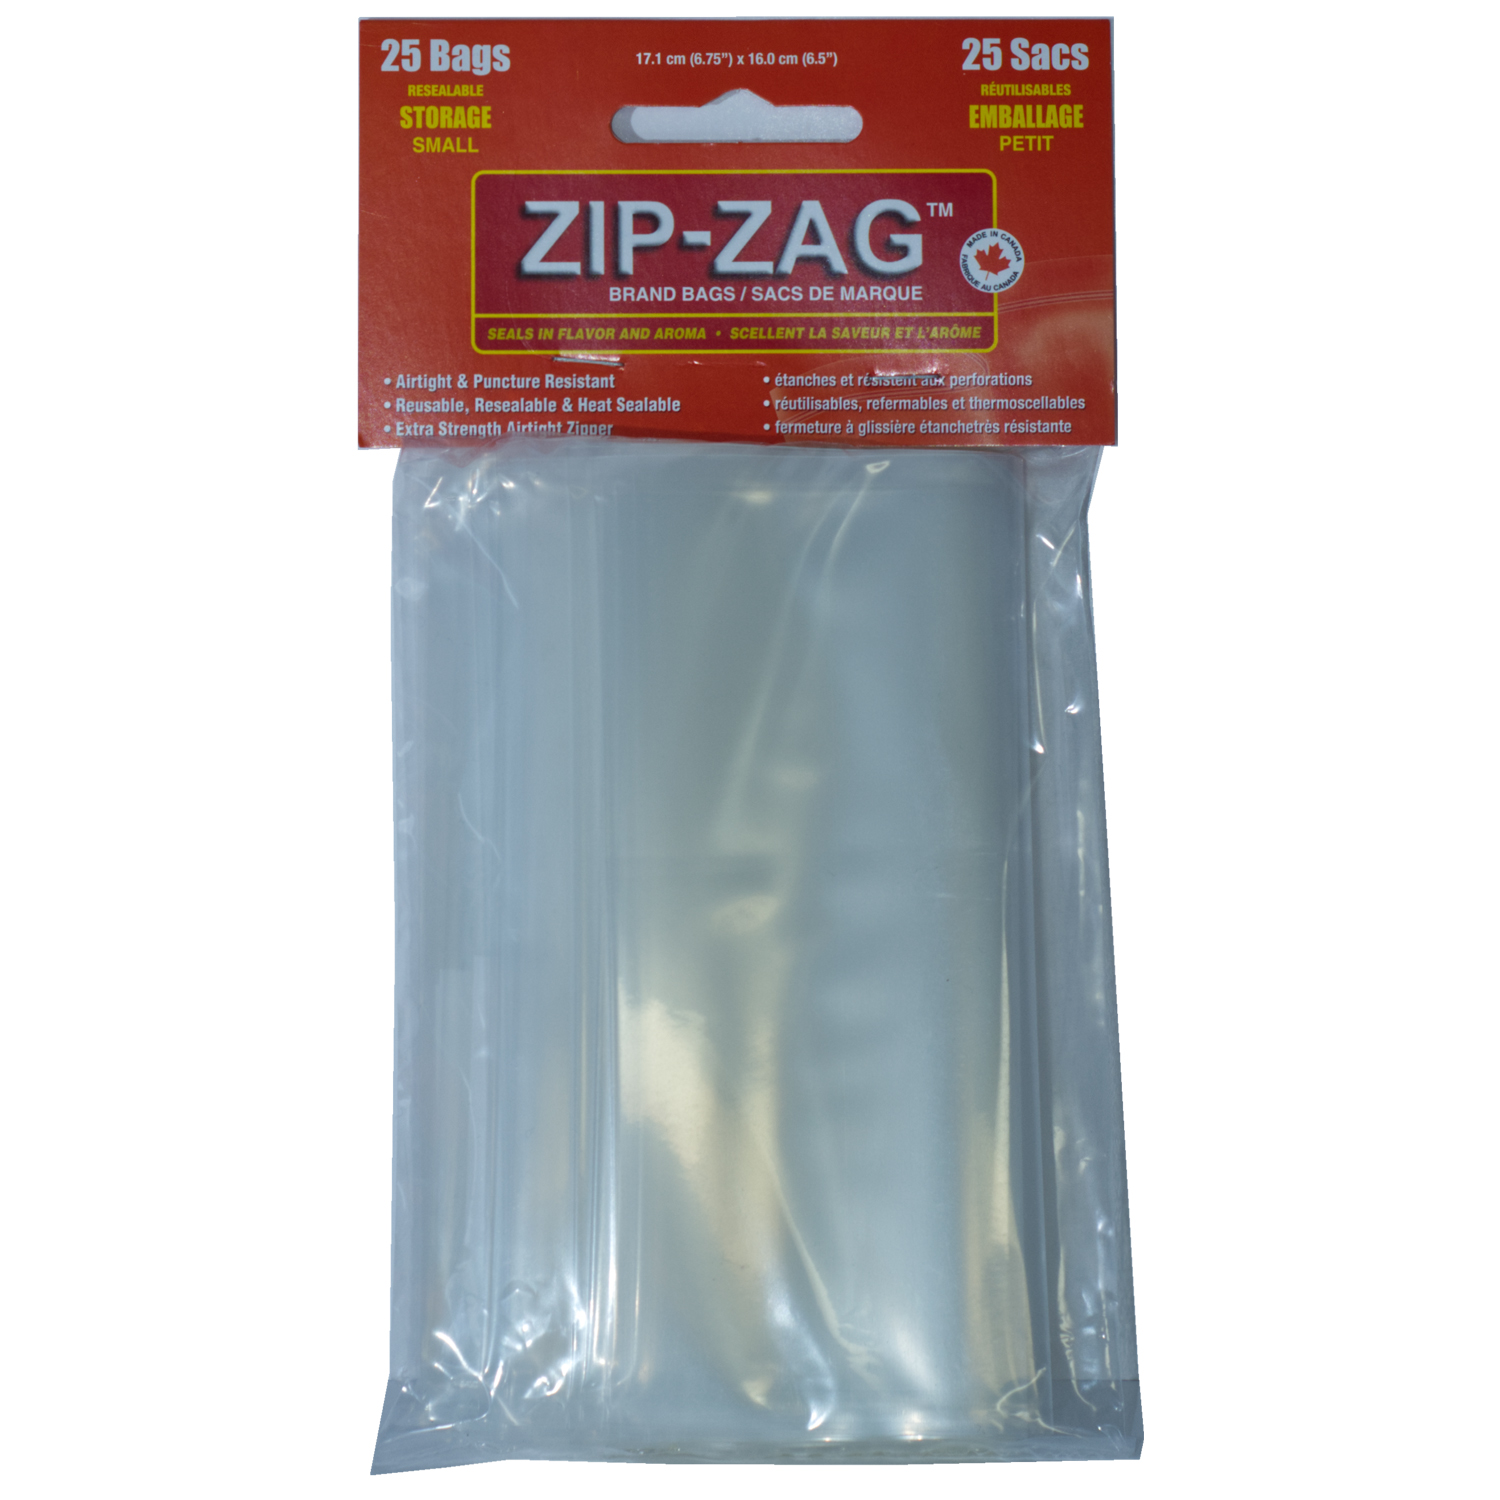 Zip-Zag Smellproof Bags Zip Lock Bags Extra Large 10 Pack Odour Control